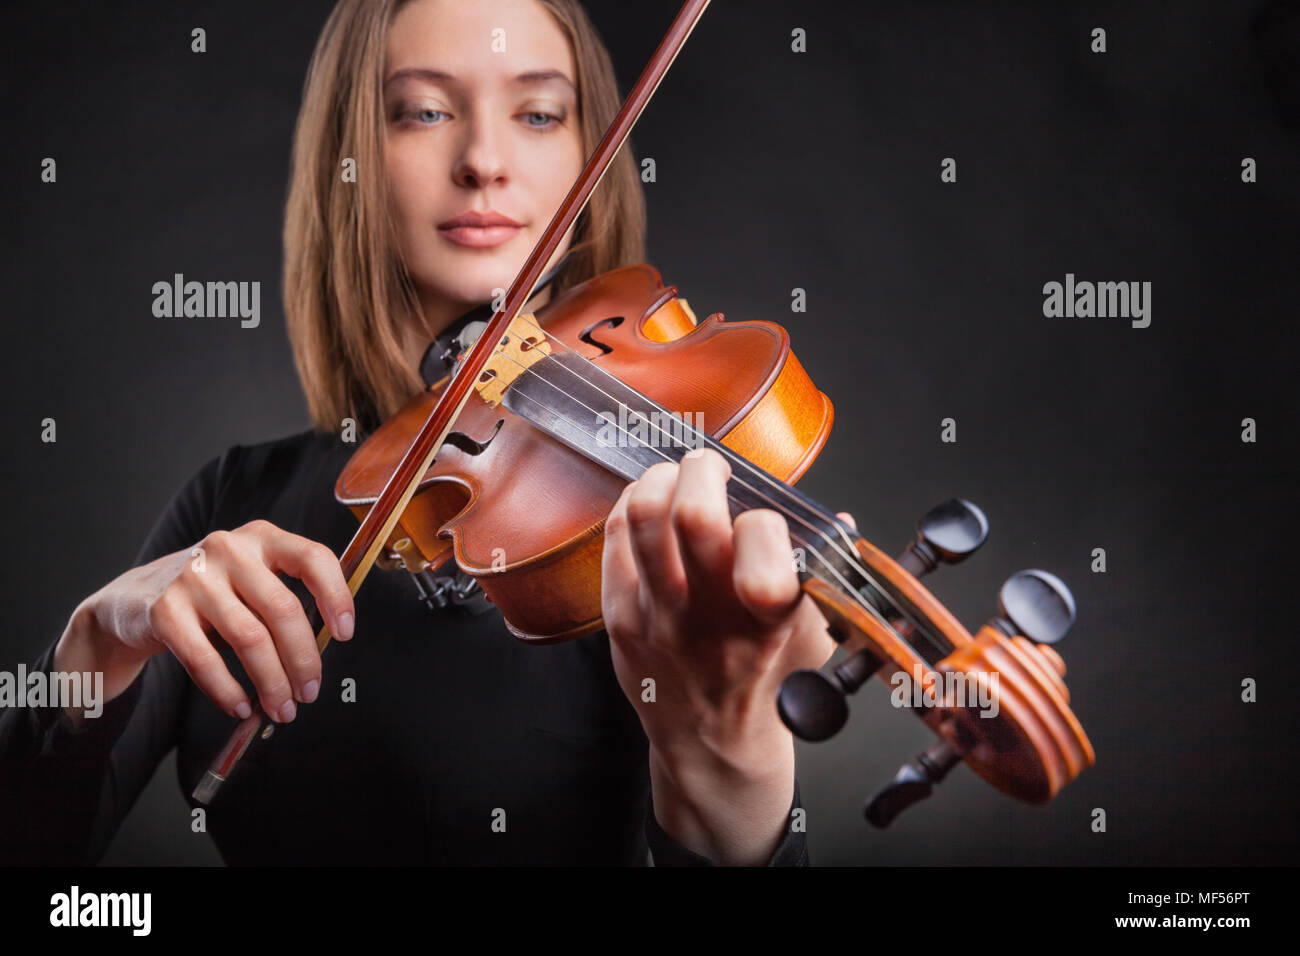 Beautiful young woman playing the violin on dark background Stock Photo